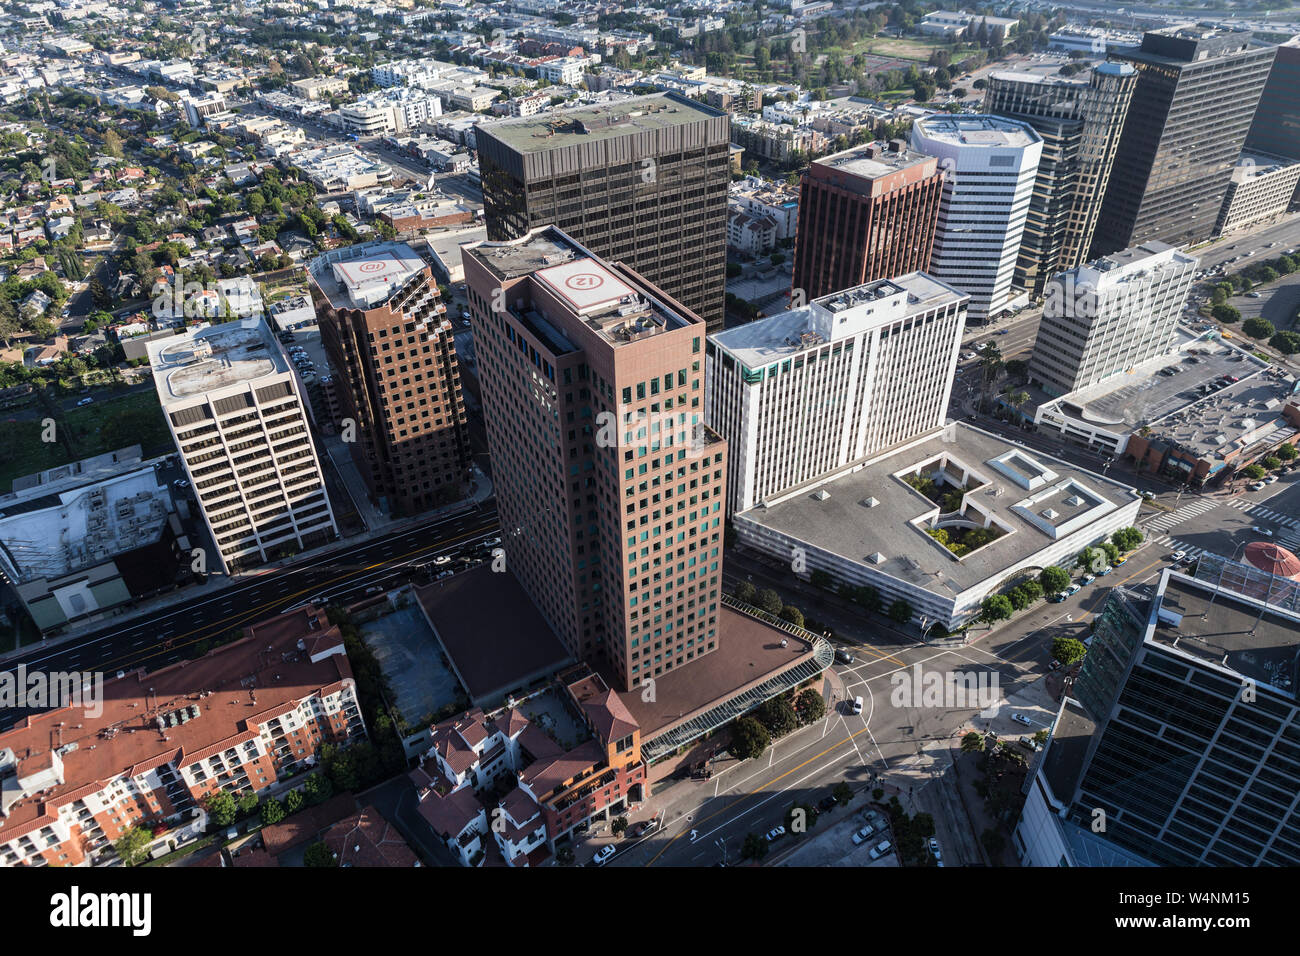 Aerial view of buildings along Wilshire Blvd near Westwood in Los Angeles, California. Stock Photo